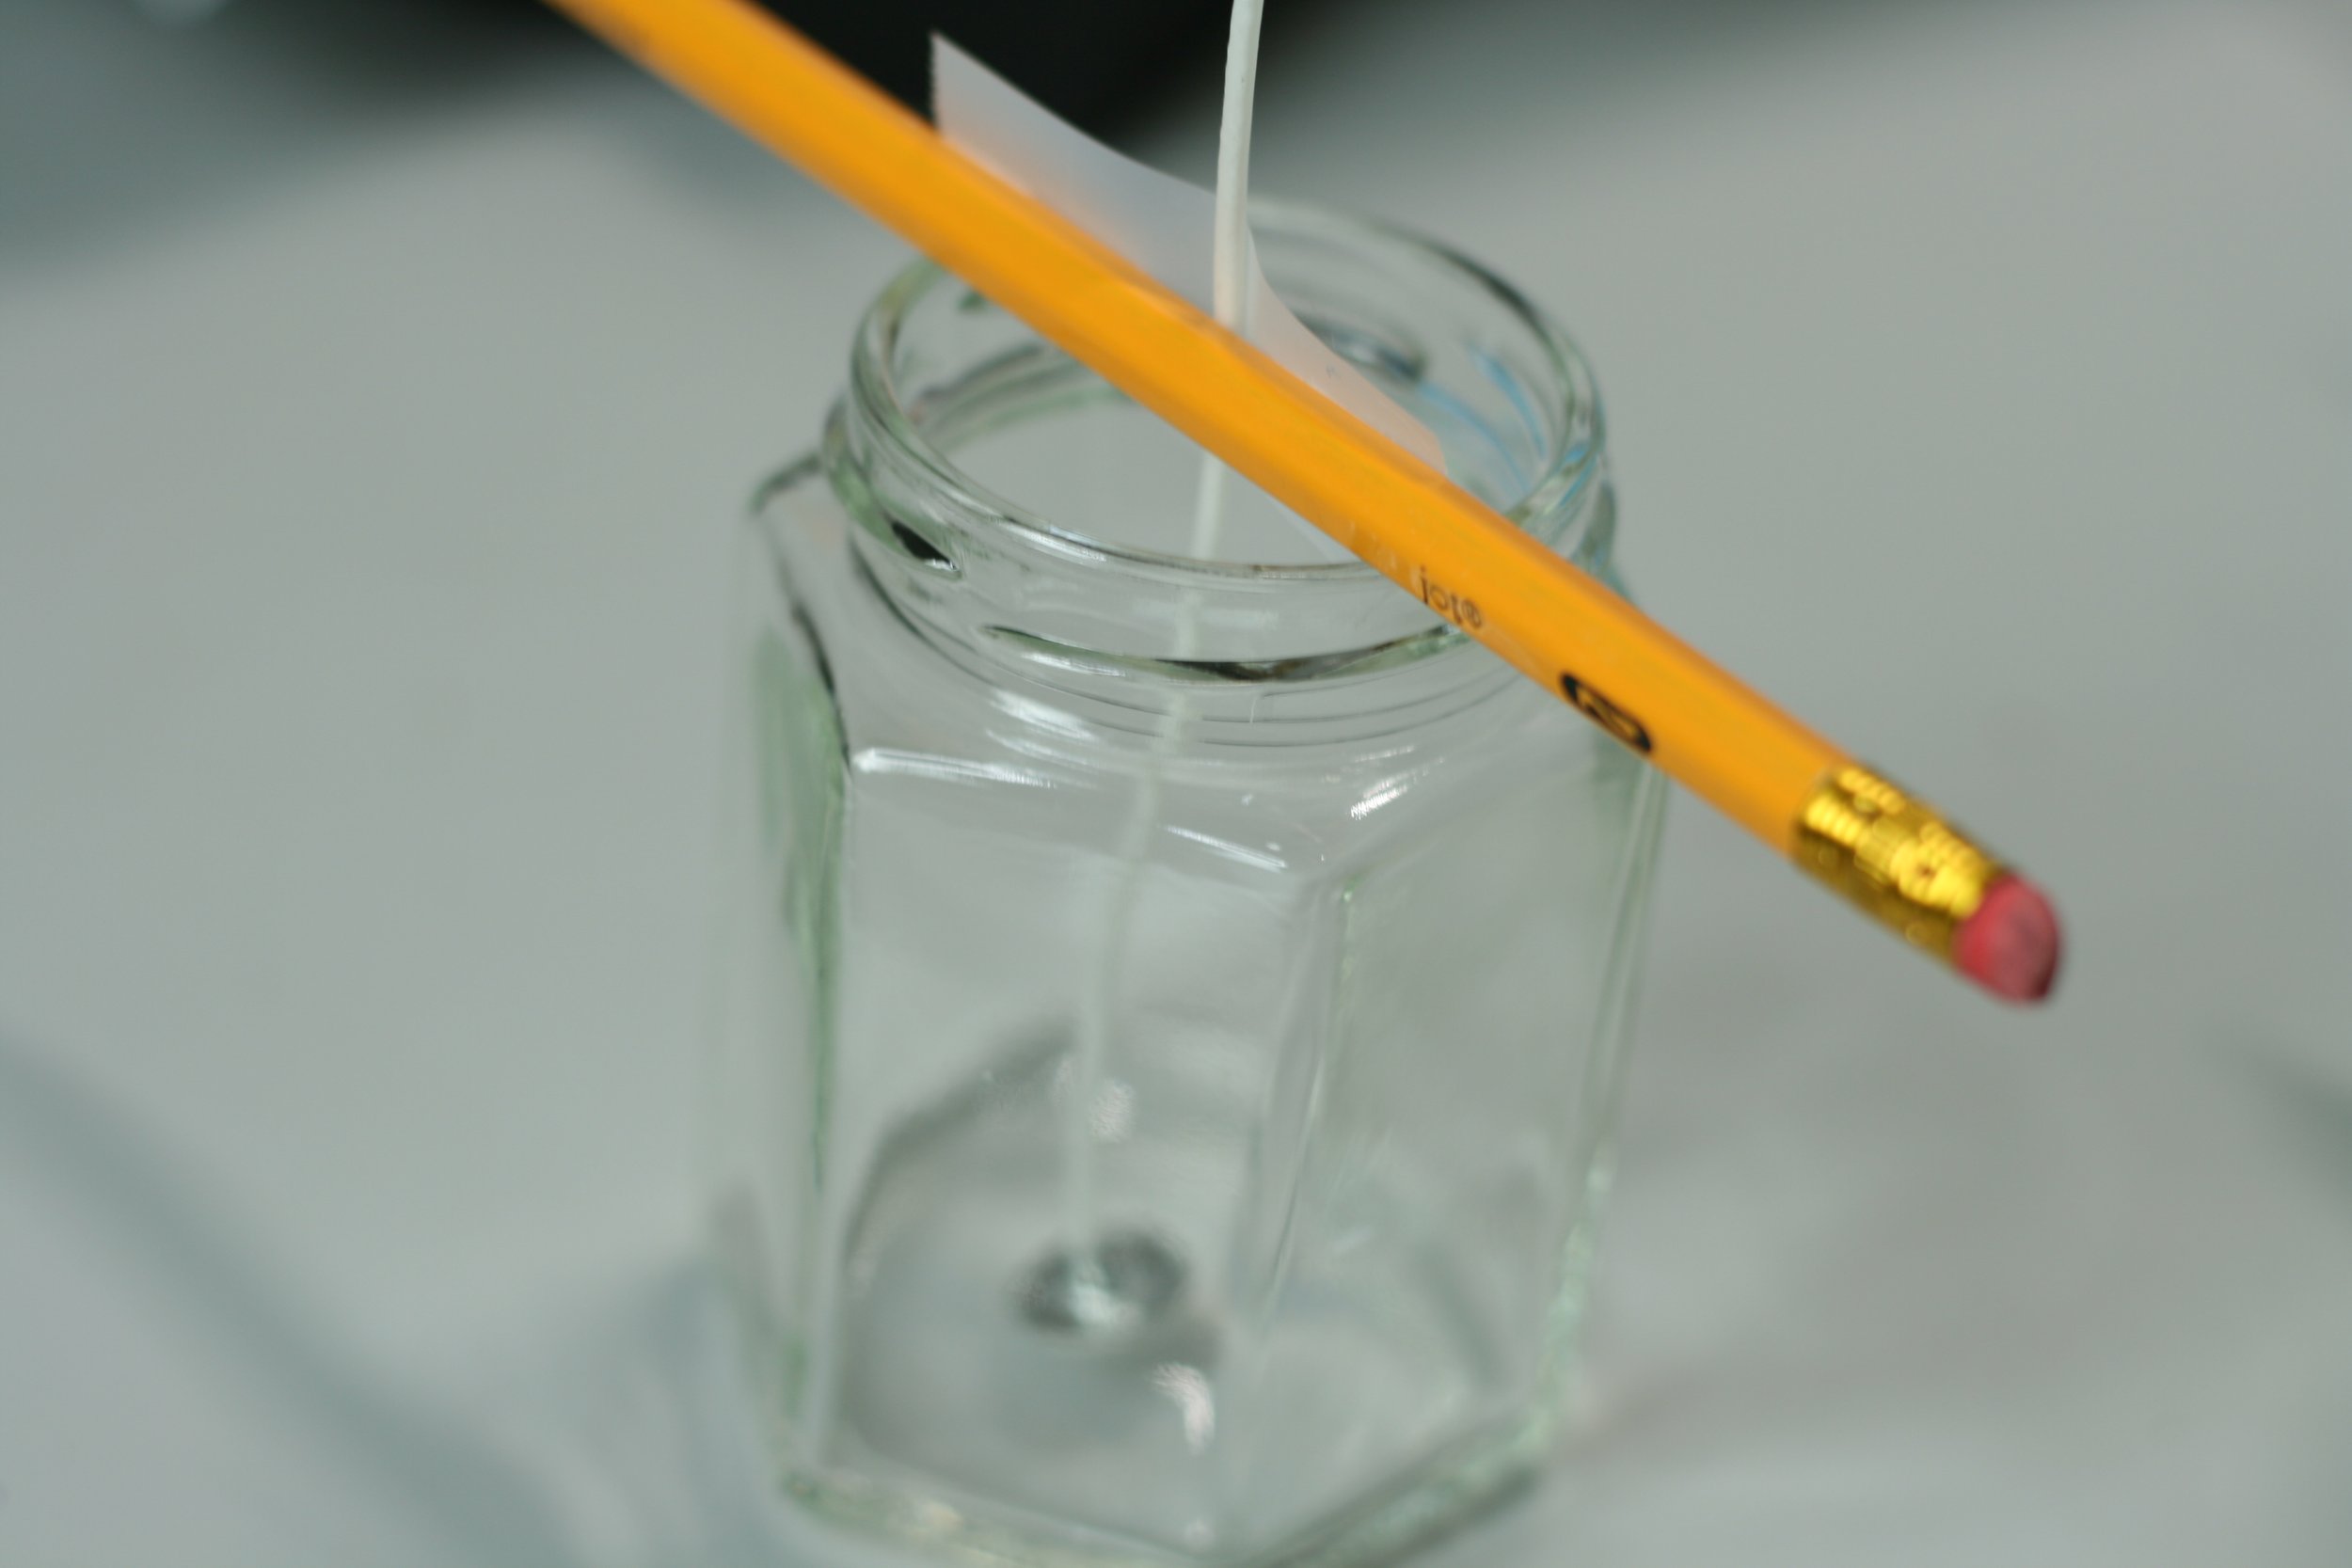 pencil centering a wick for the candle wax